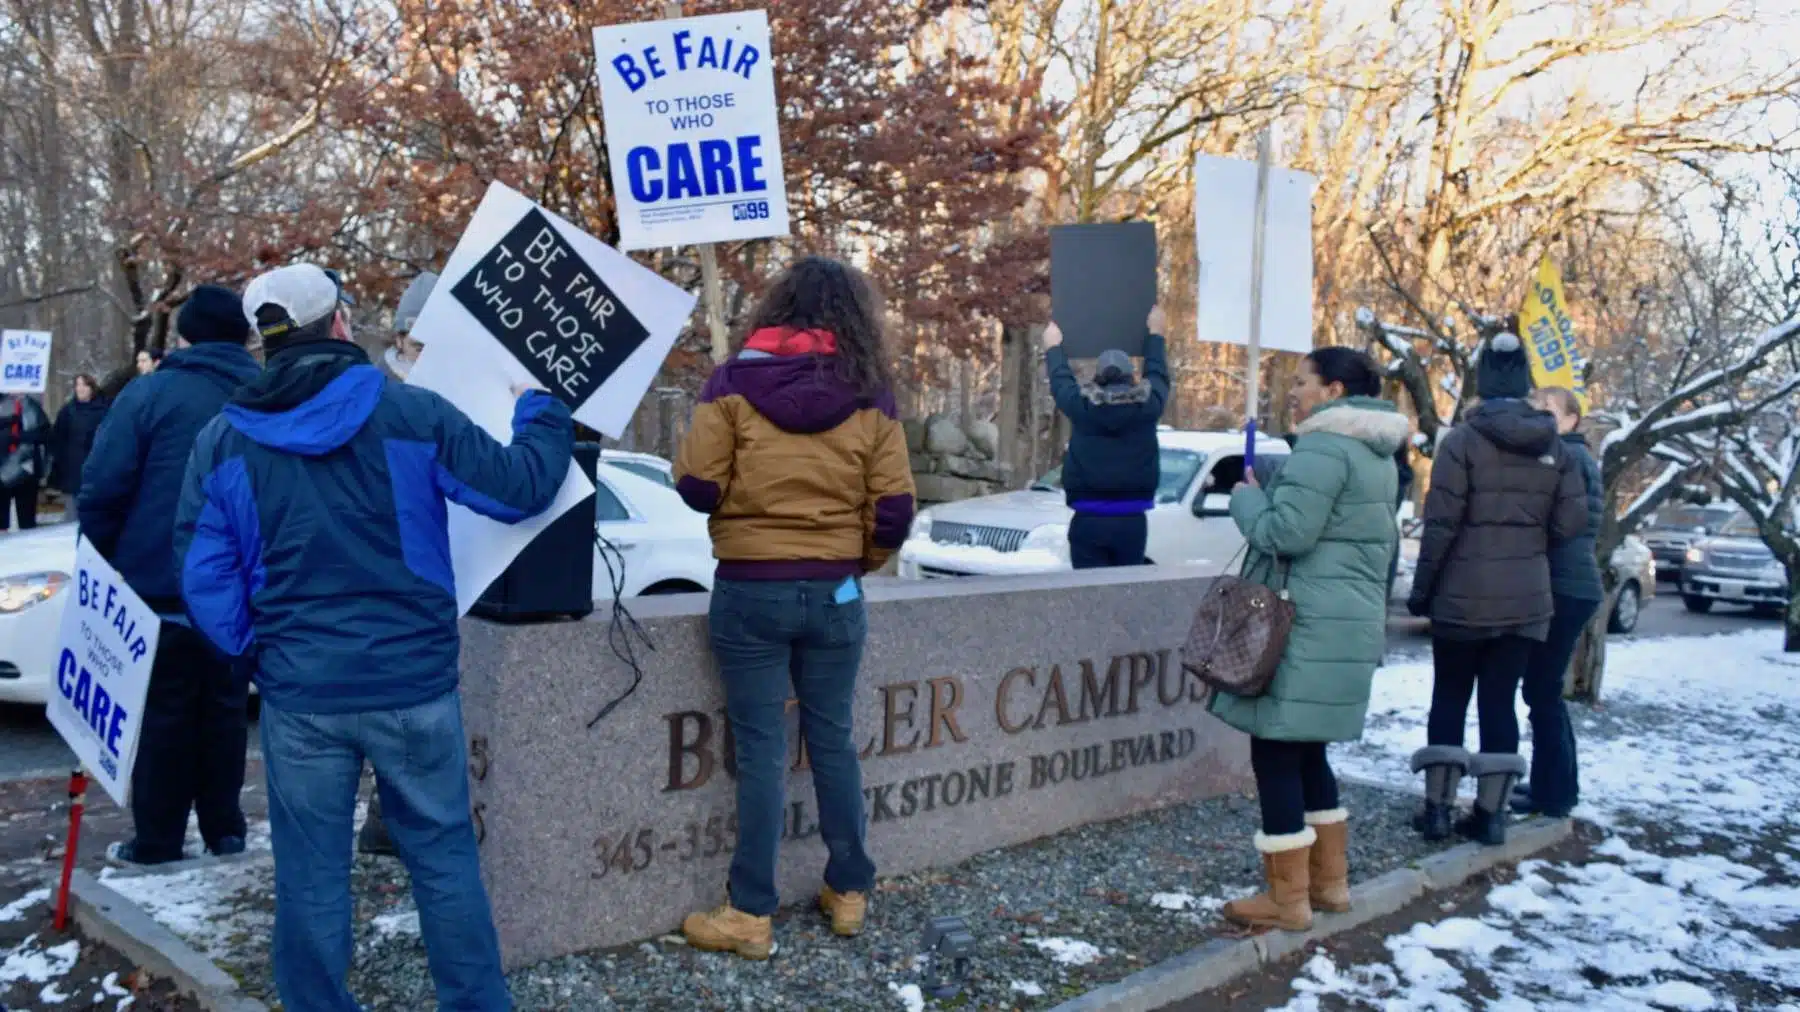 Butler Hospital workers picket for patient safety and to protect good jobs